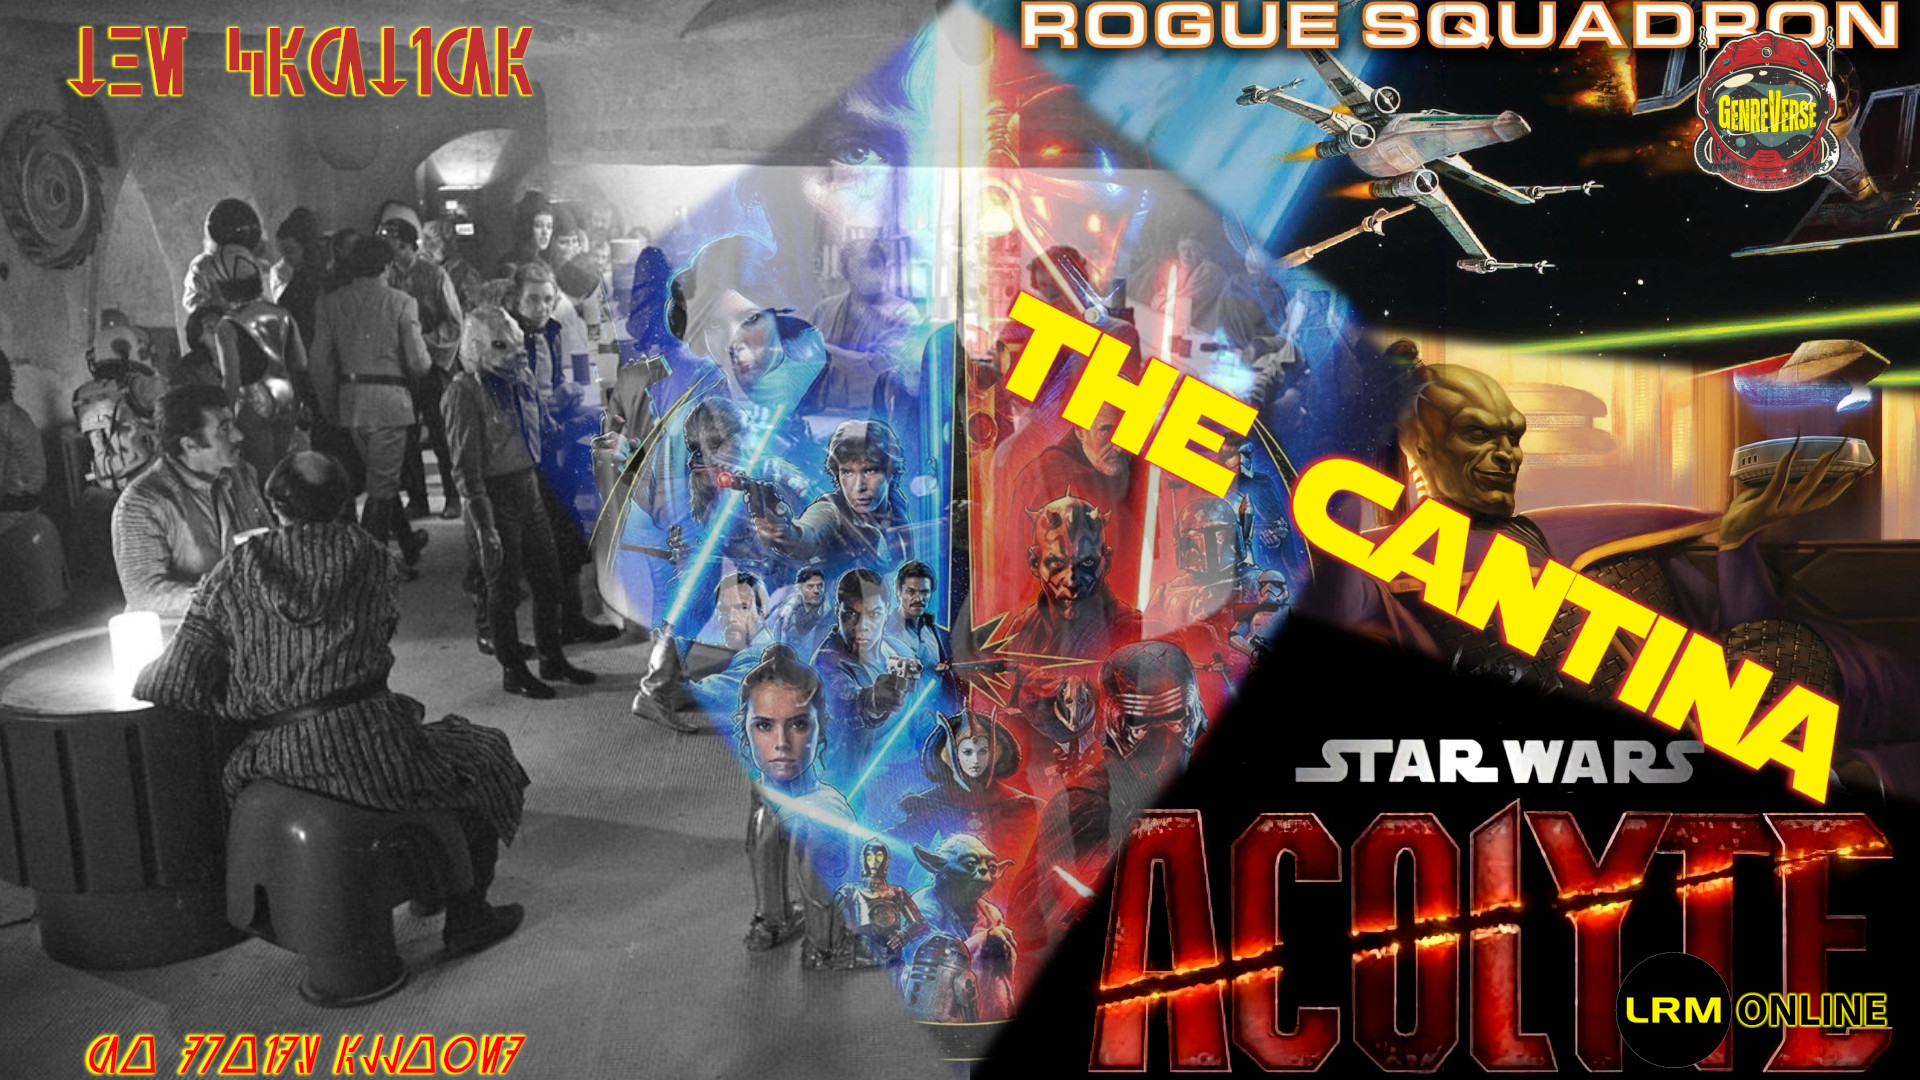 Patty Jenkins Back On Rogue Squadron Update, Prince Xizor And Star Wars Canon EU, The Acolyte Casts Amandla Stenberg The Cantina Video